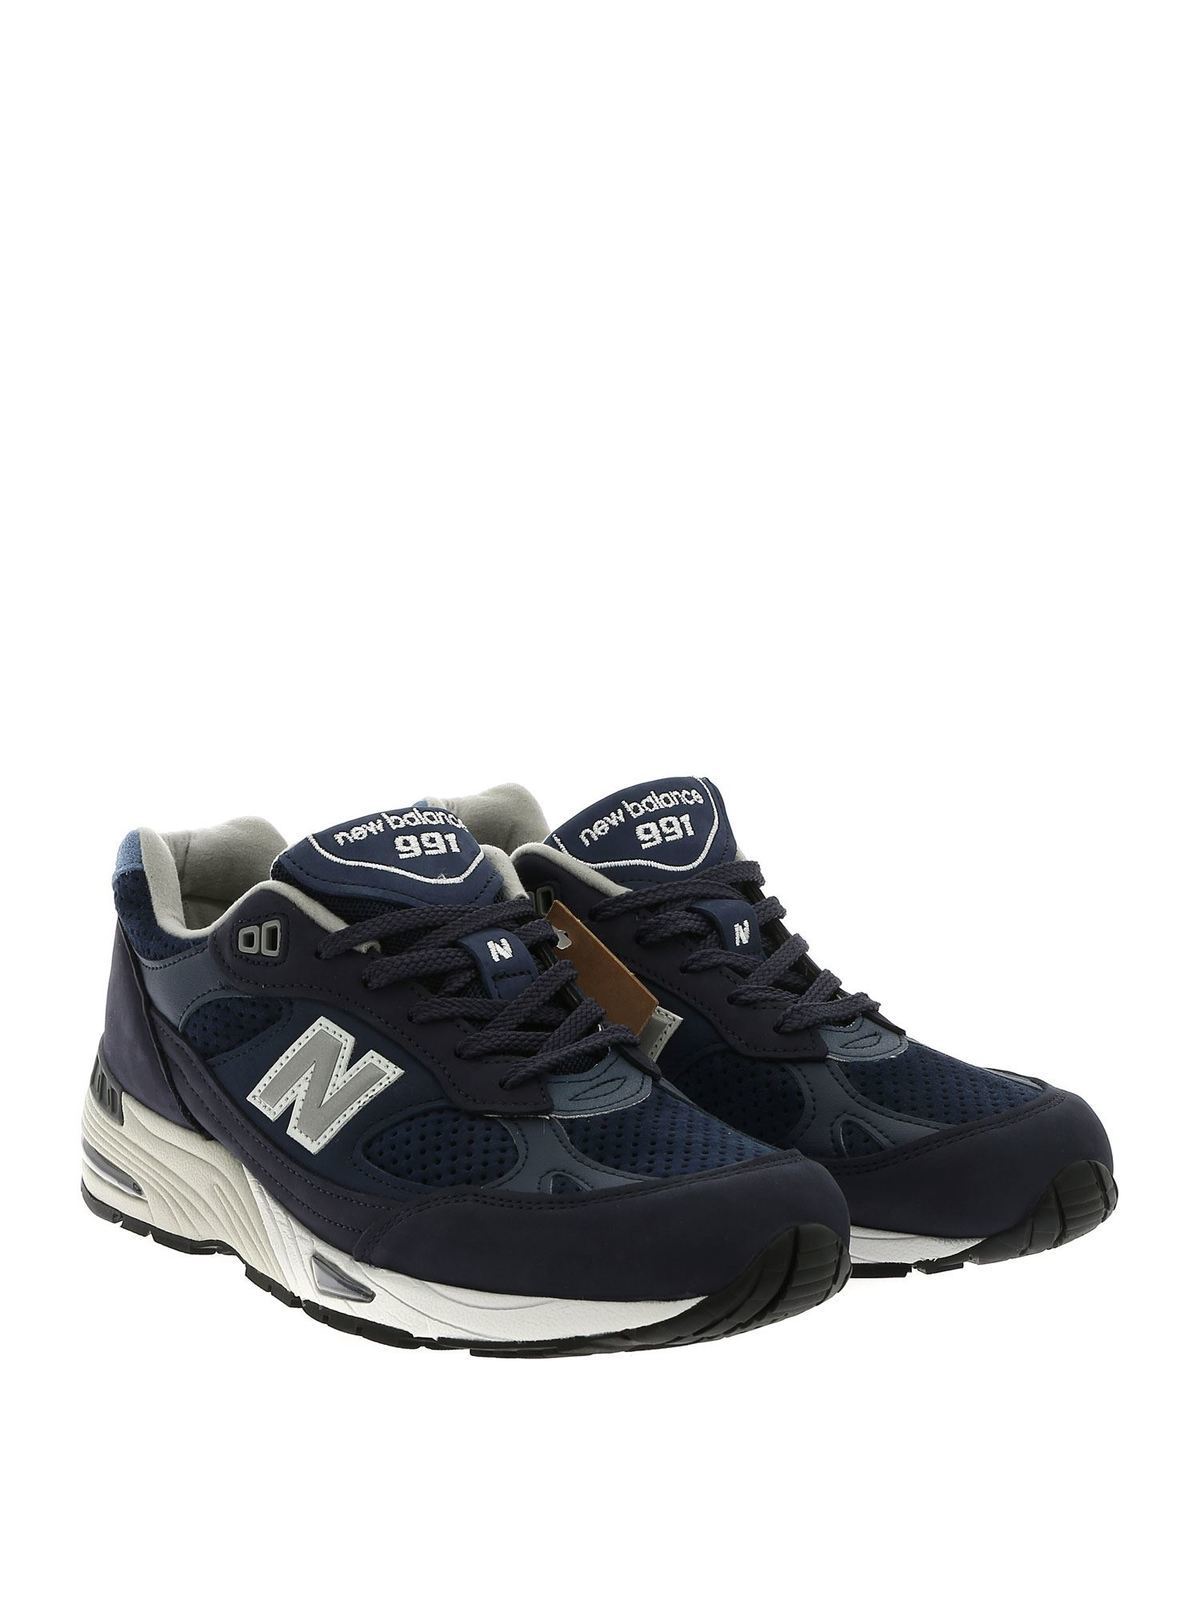 Trainers New Balance - Made in UK 991 sneakers in blue and grey M991NVT